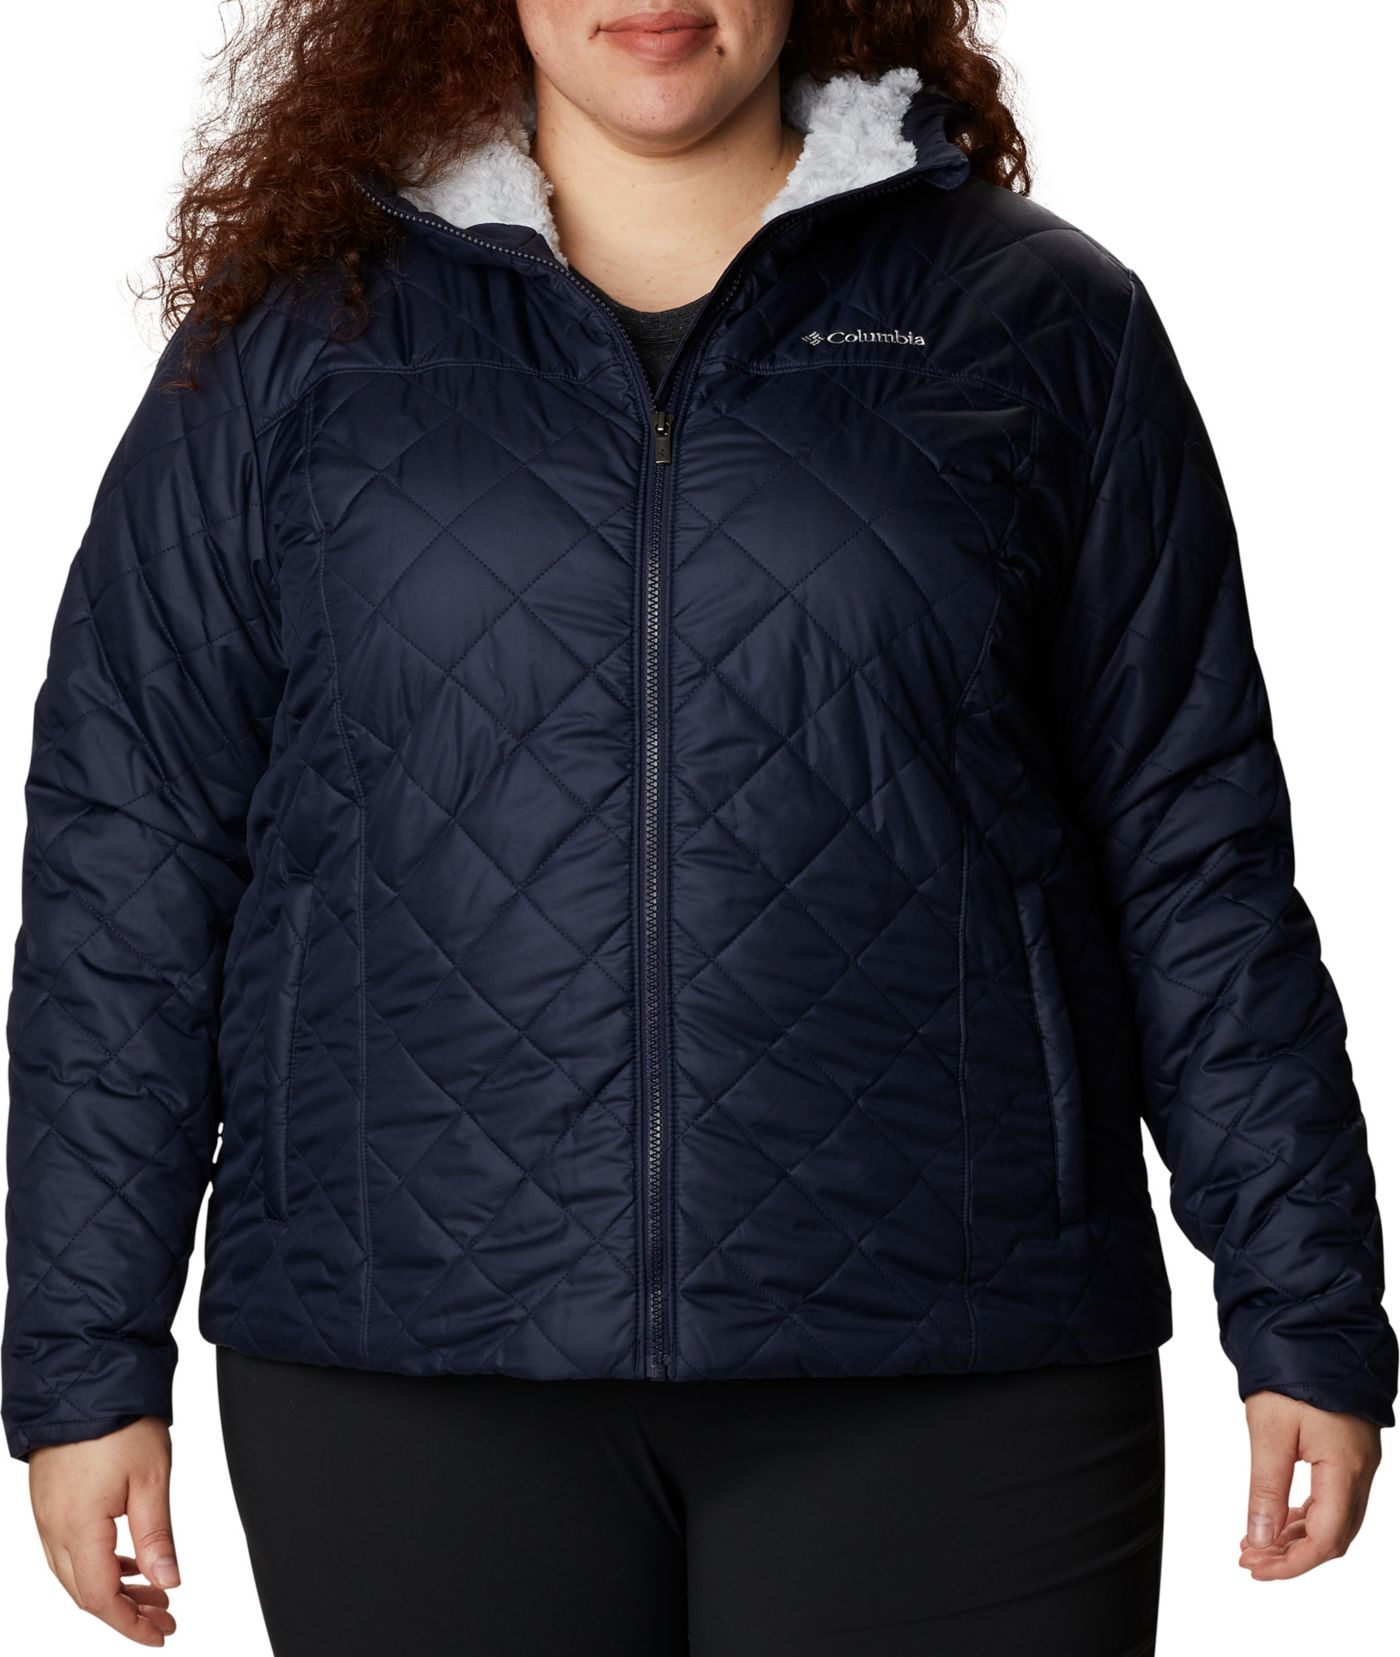 Columbia Women's Copper Crest Hooded Jacket | DICK'S Sporting Goods